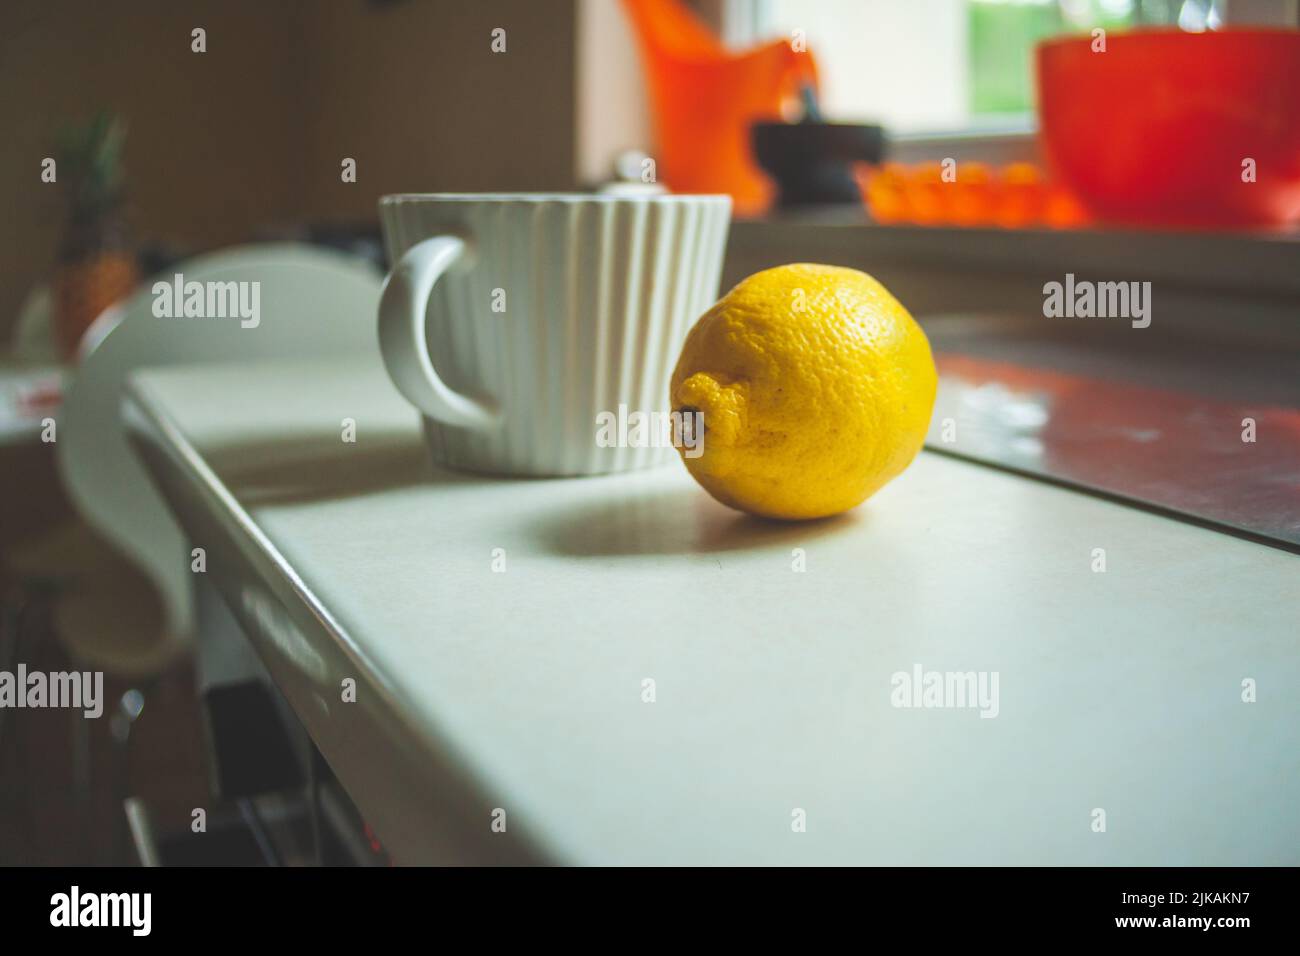 A cup and lemon on the countertop Stock Photo